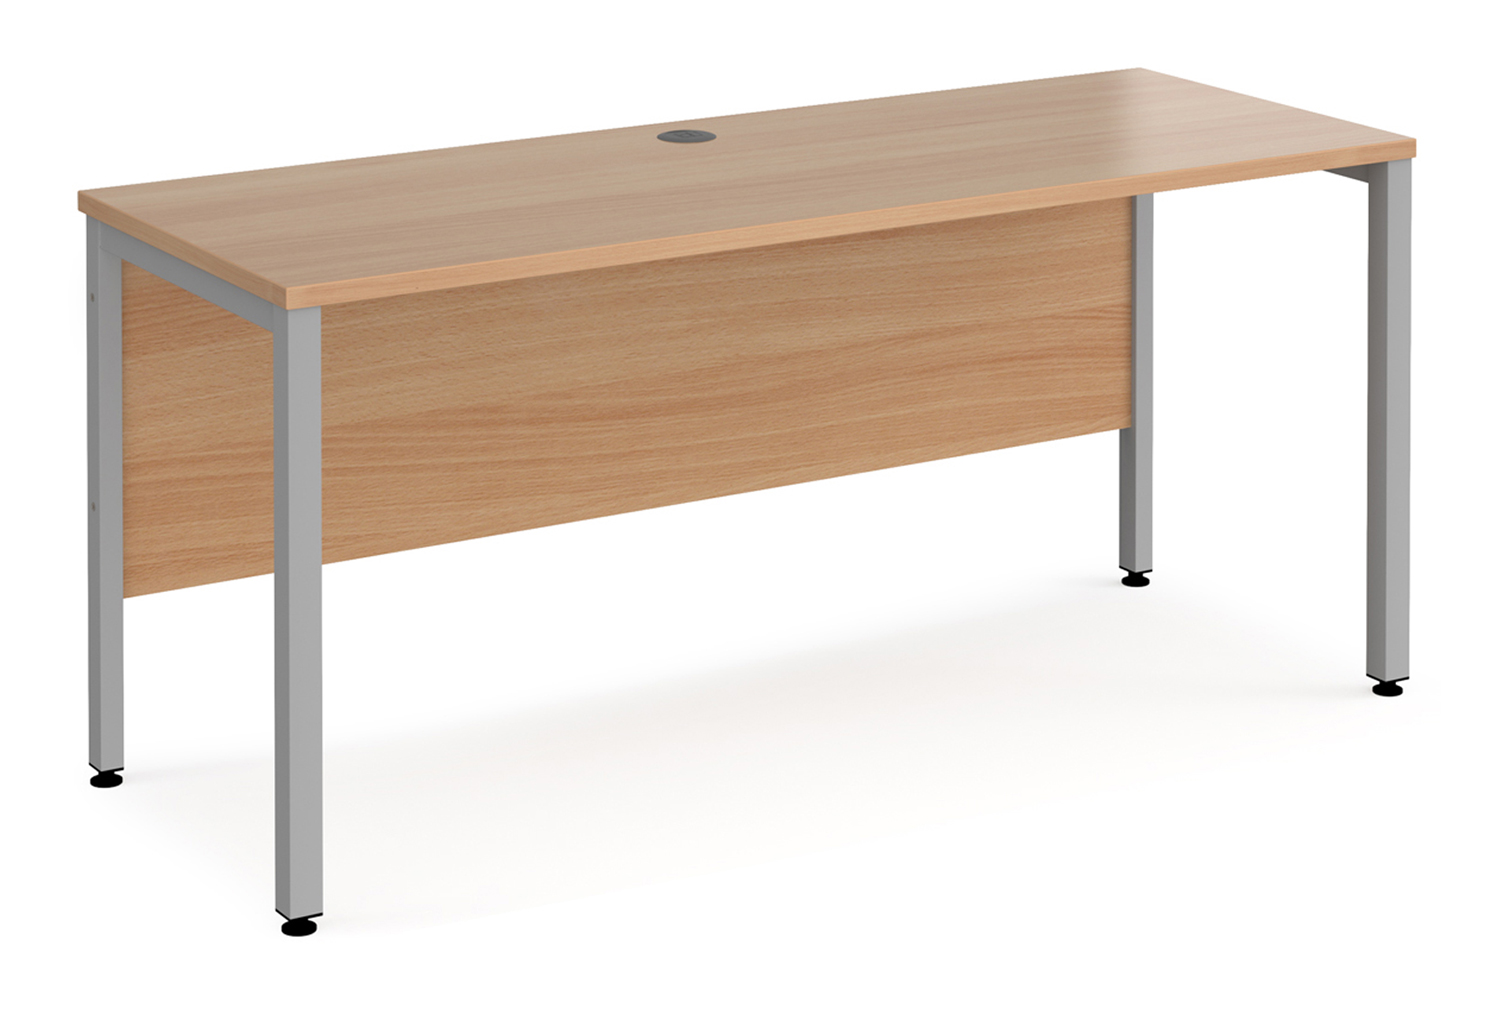 Value Line Deluxe Bench Narrow Rectangular Office Desks (Silver Legs), 160w60dx73h (cm), Beech, Express Delivery